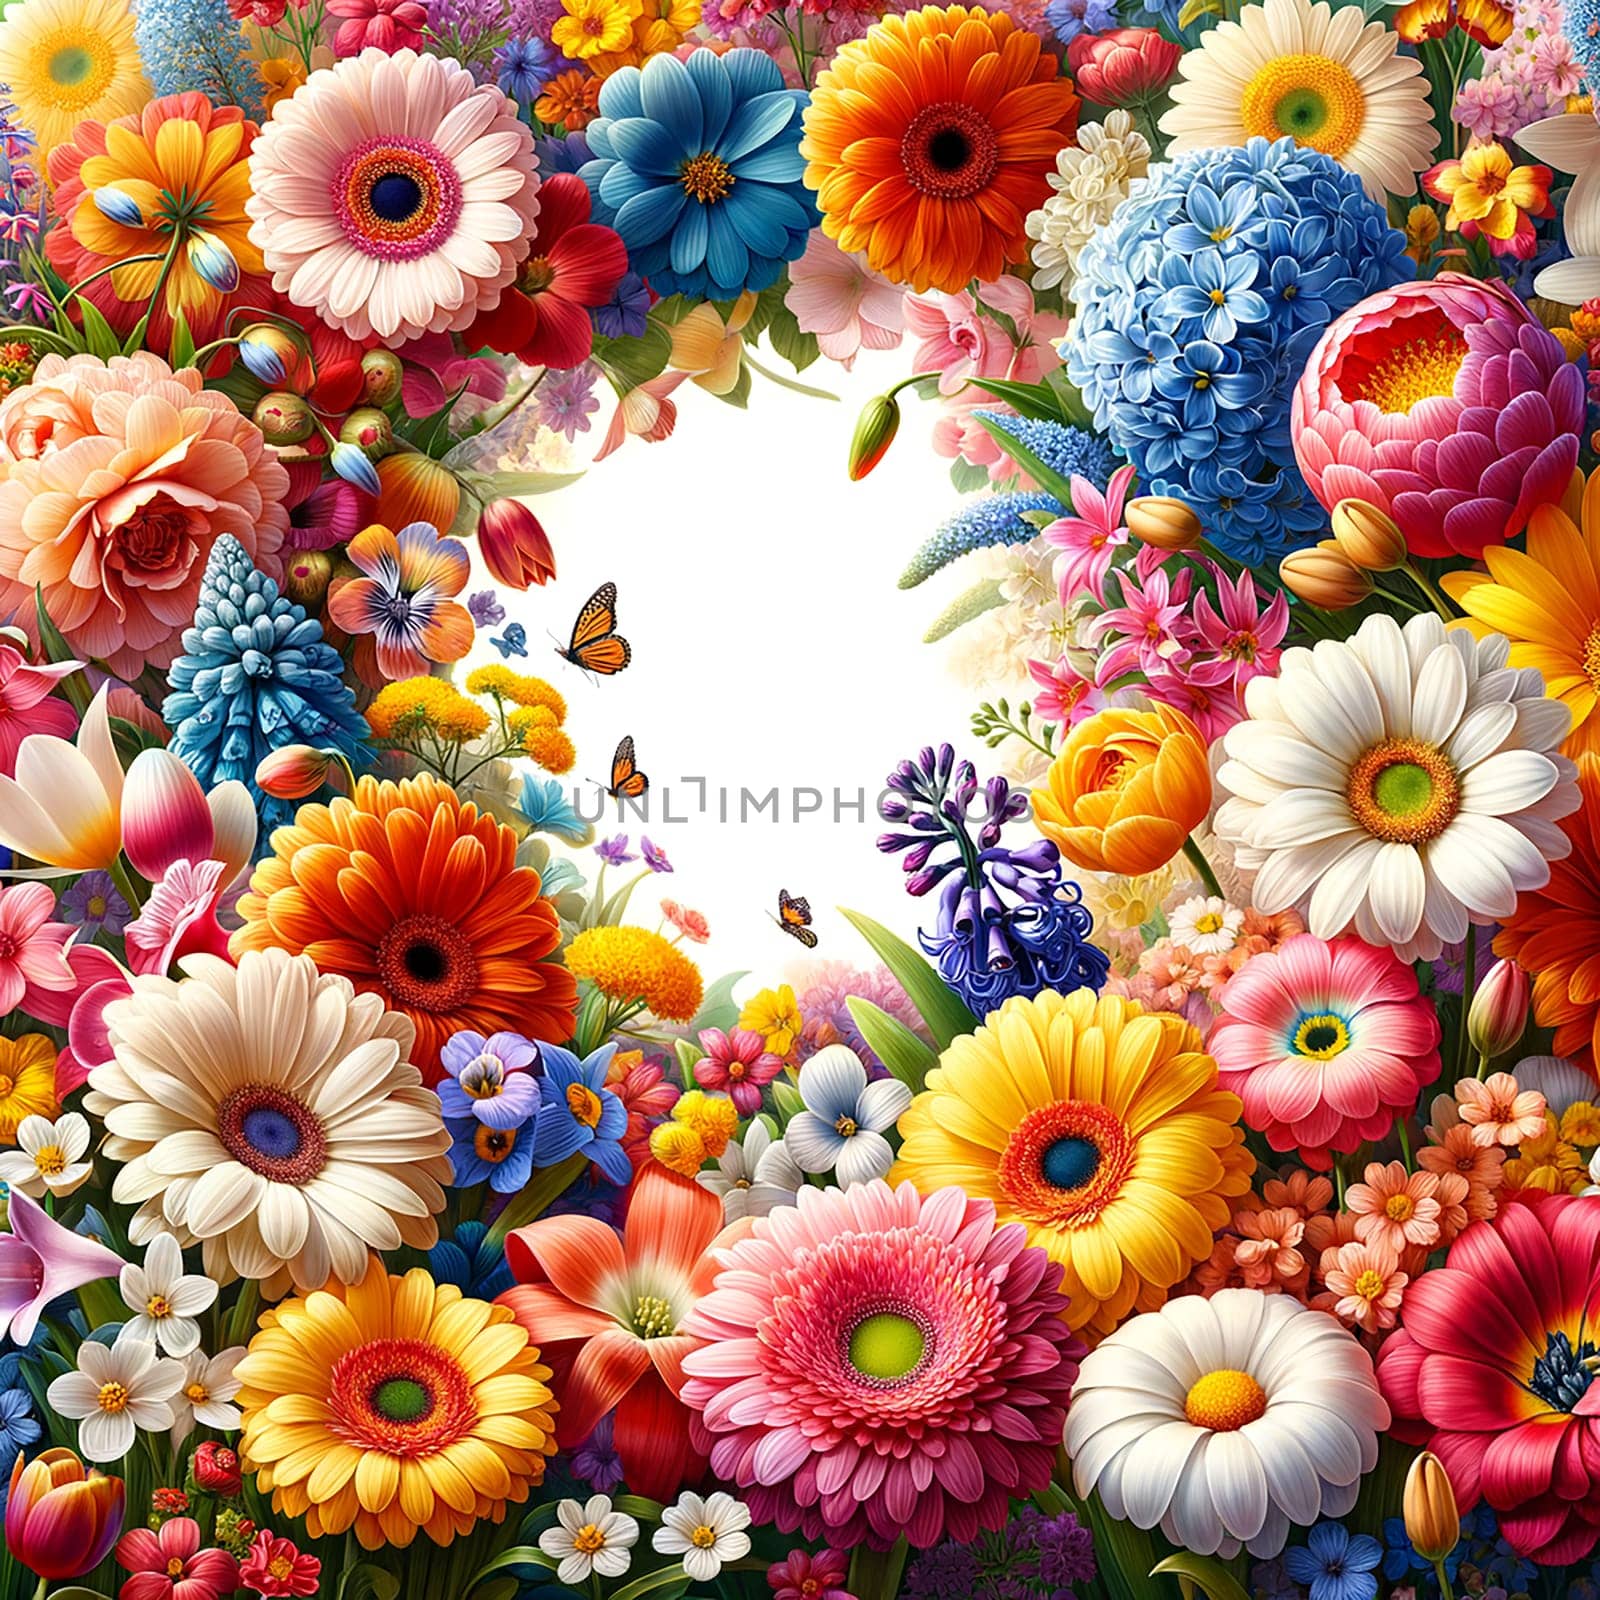 Floral Frame Delight: Spring Flowers Background by Petrichor